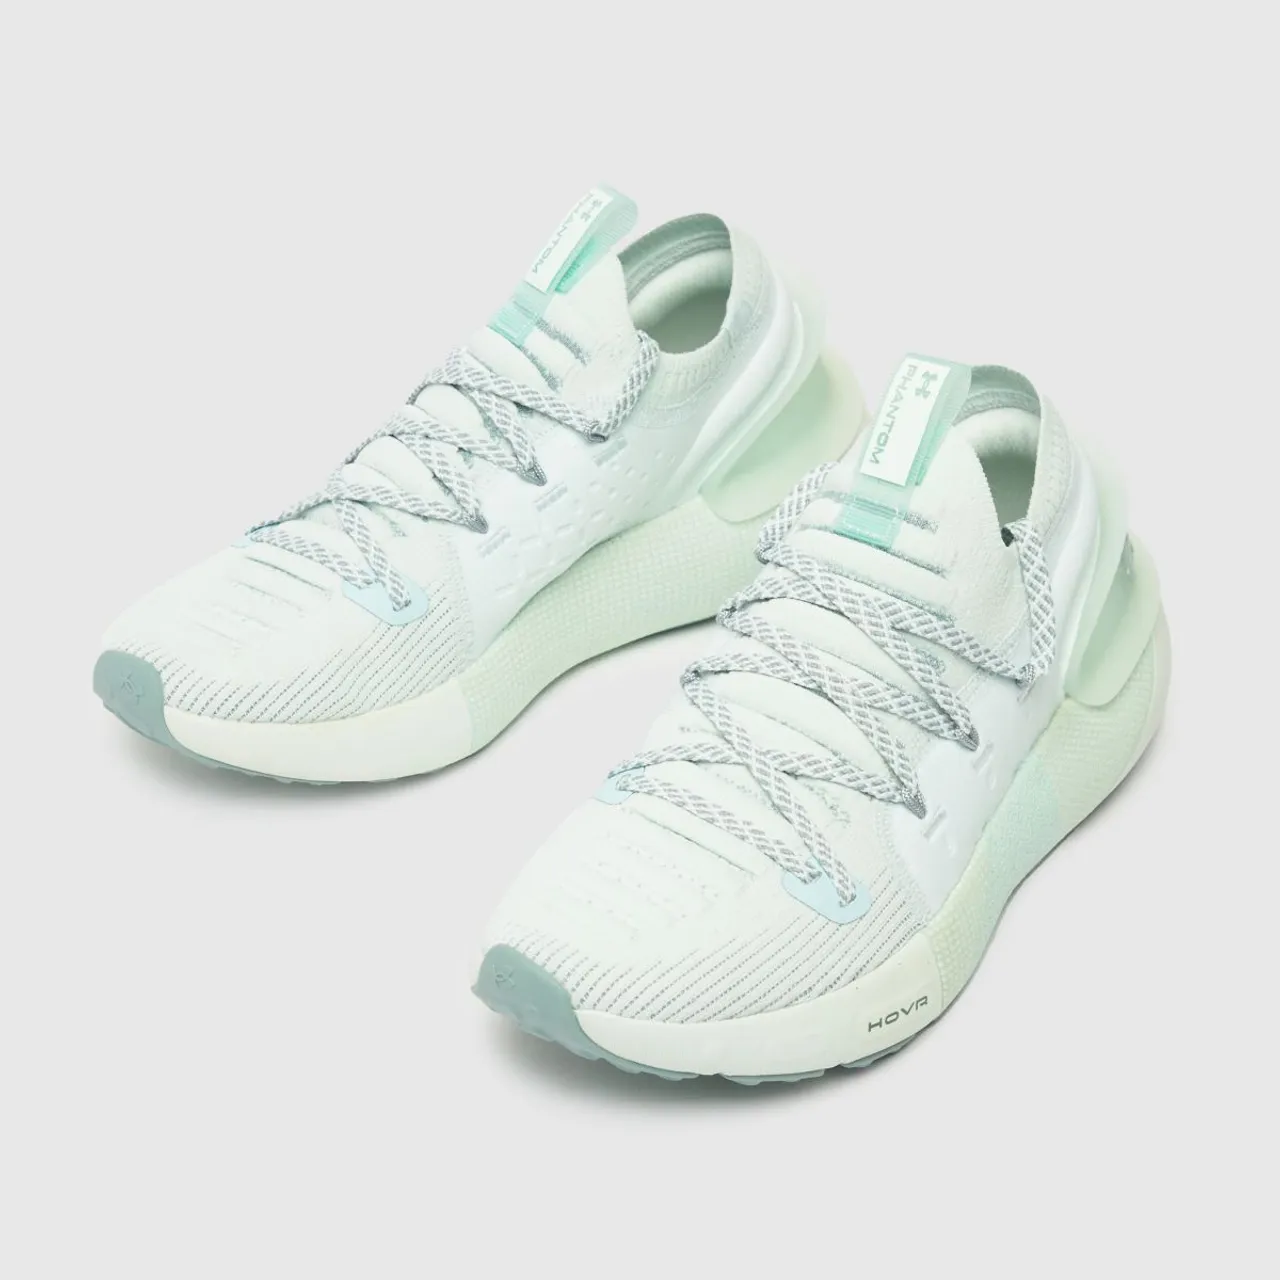 Under Armour Hovr Phantom 3 Launch Trainers In Light Green